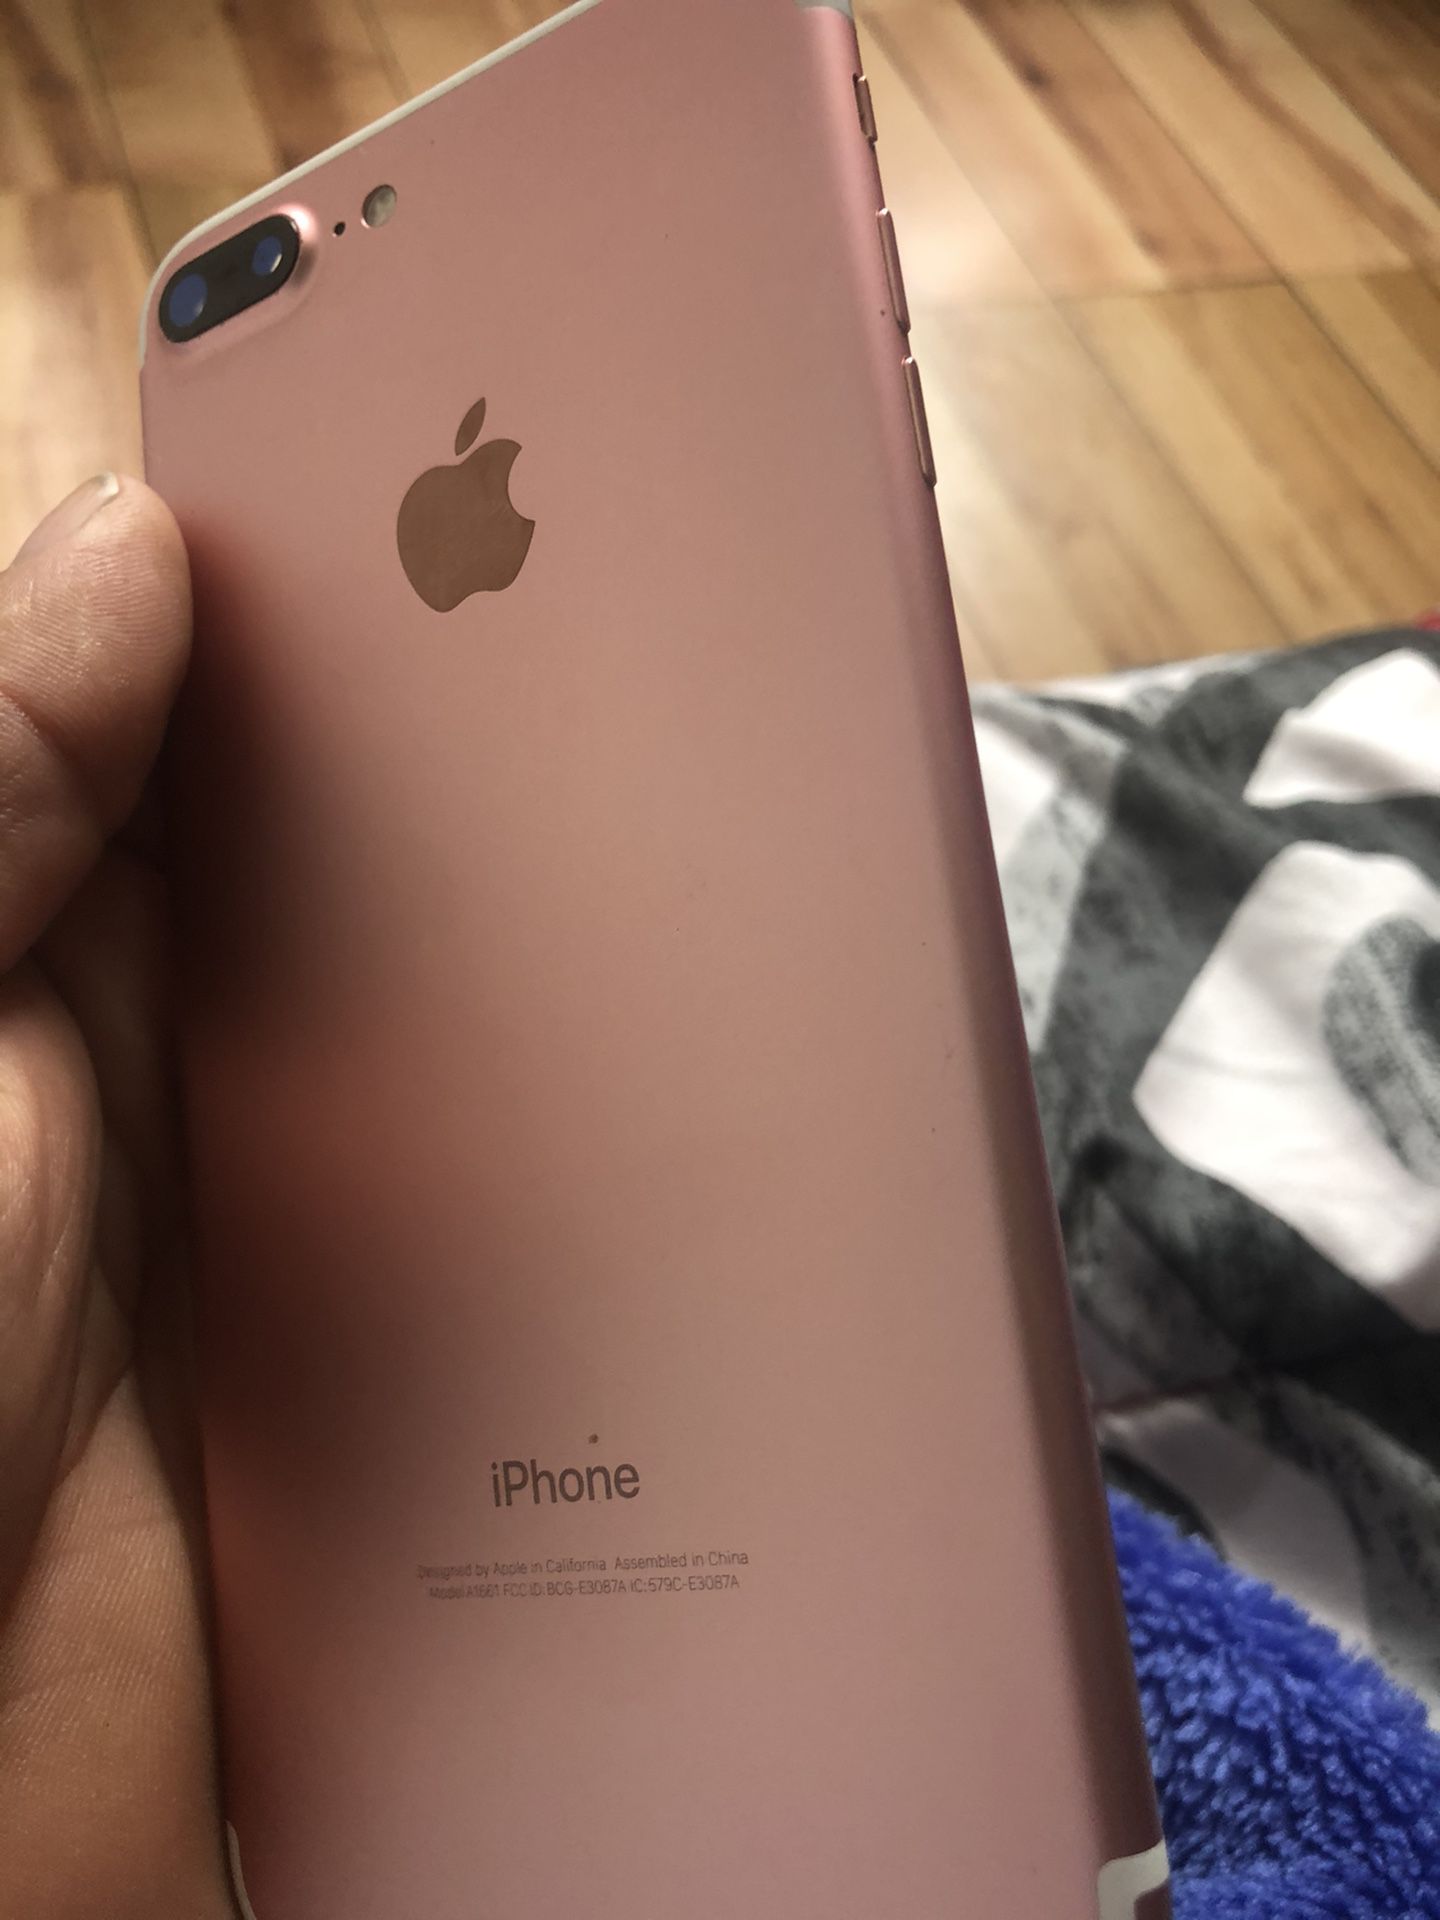 I have for sale iPhone 7 Plus brand new